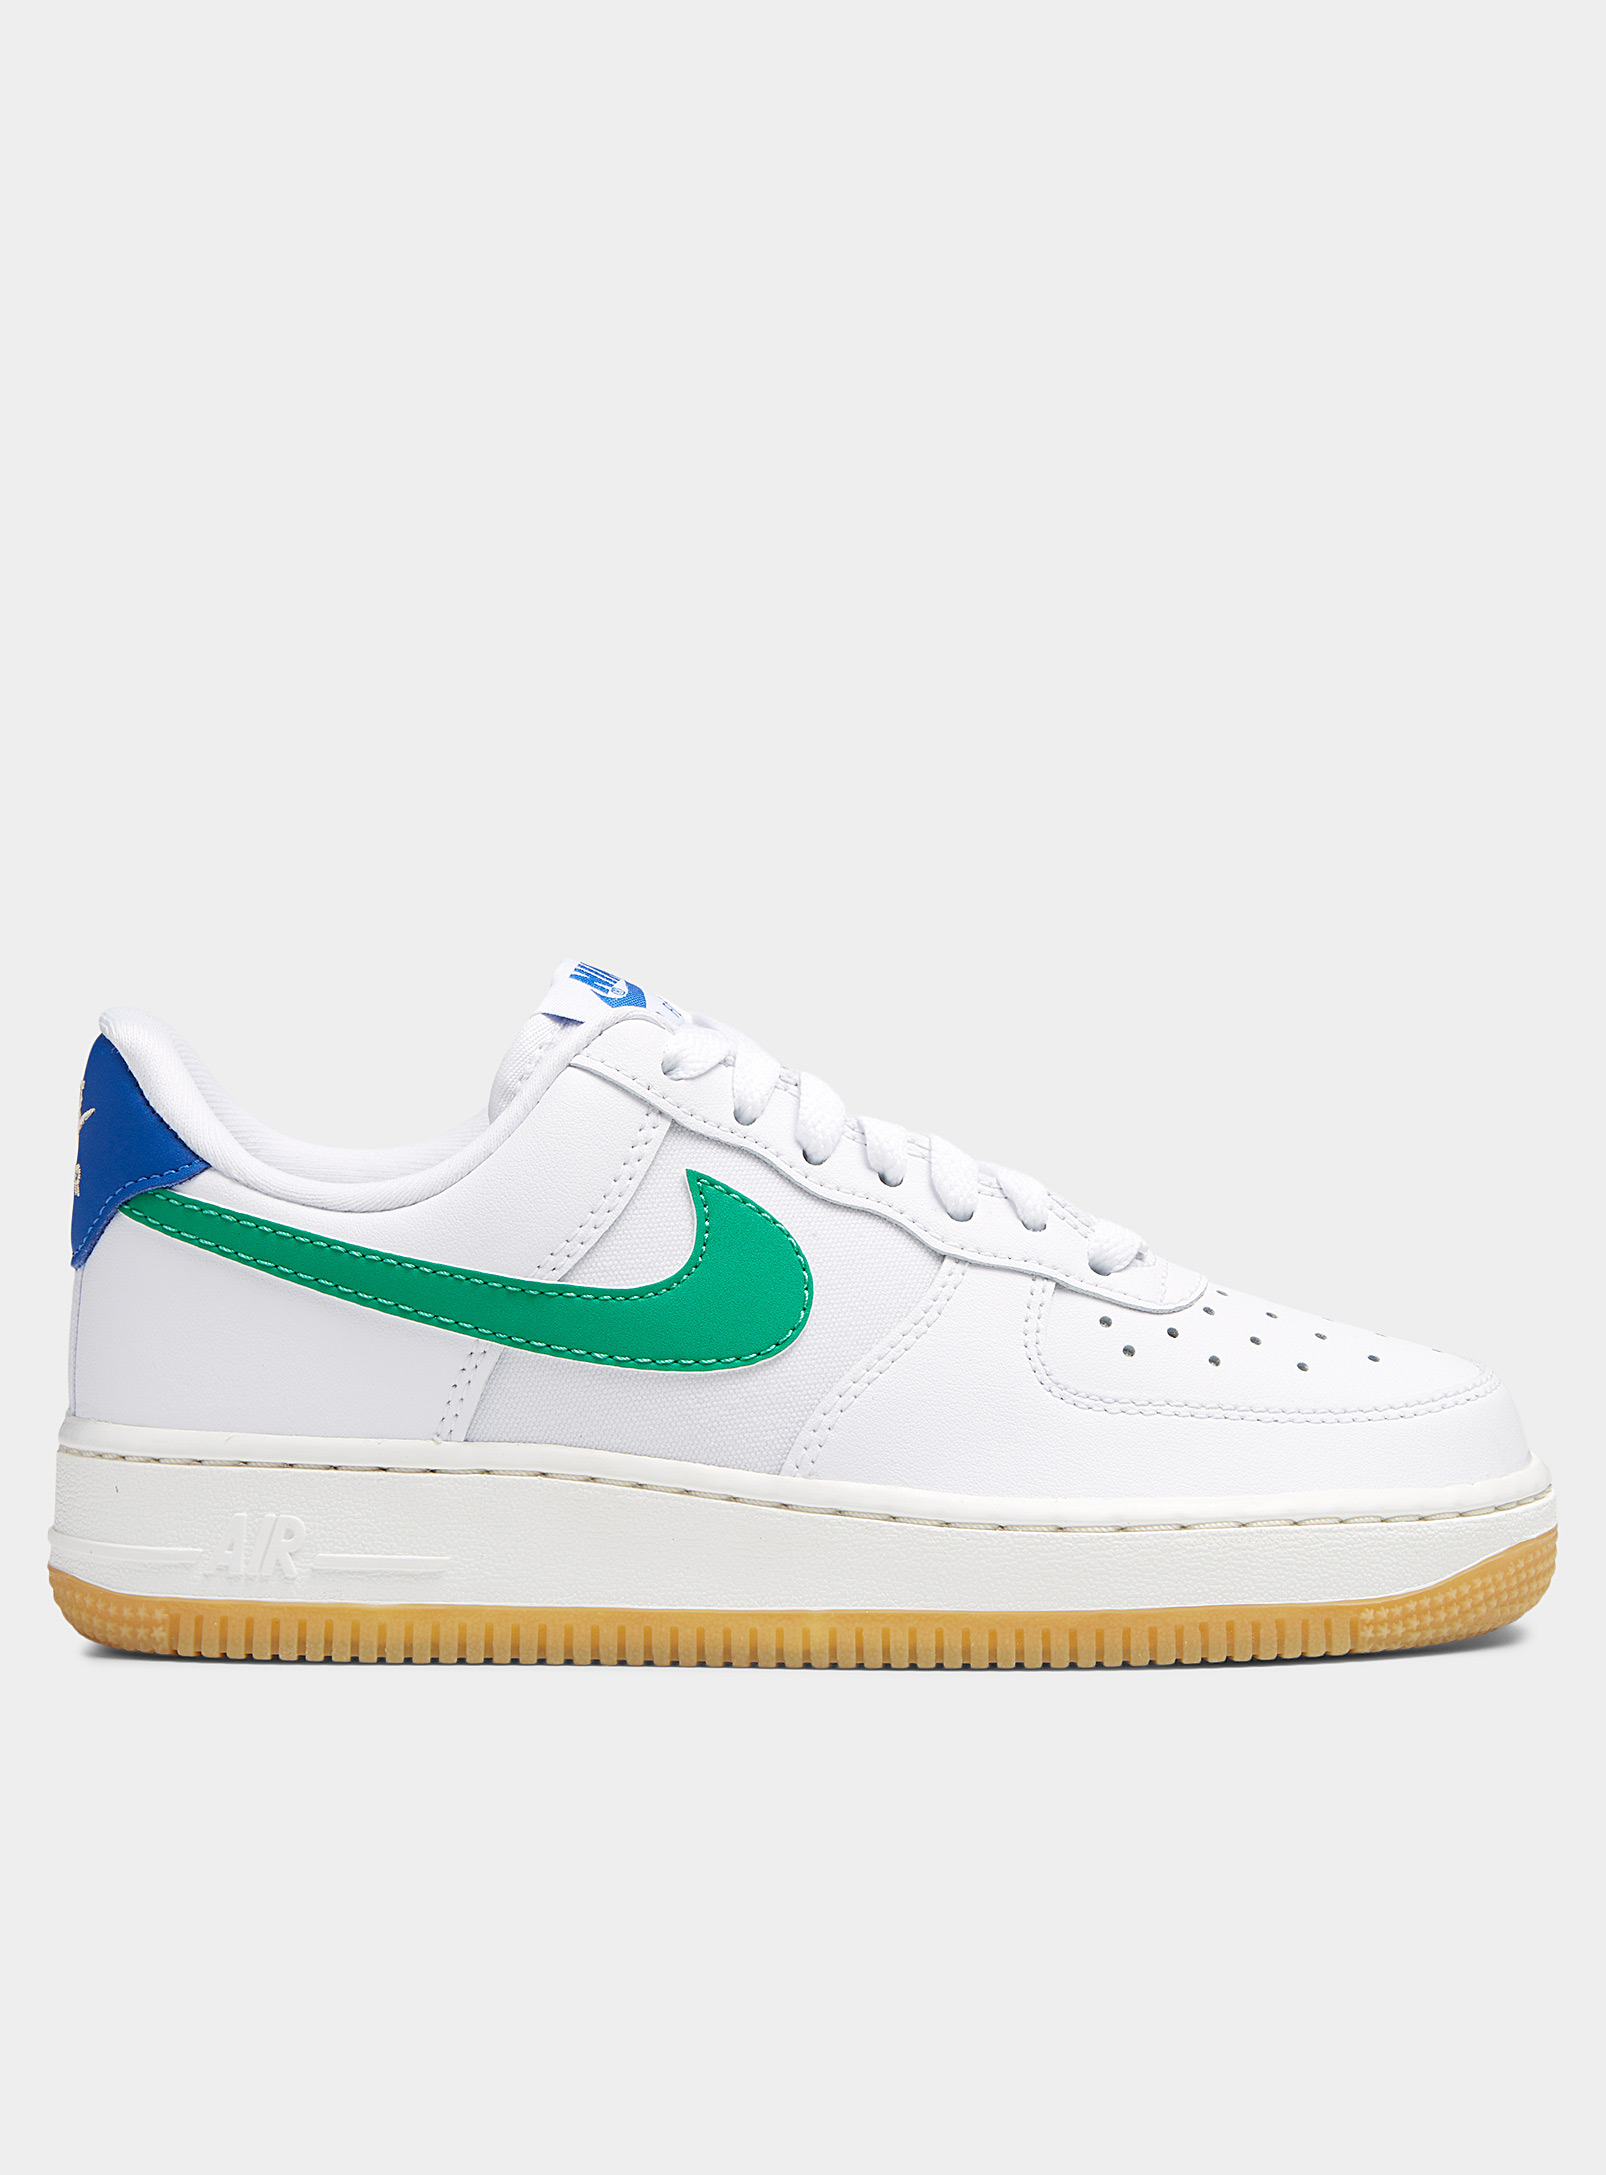 NIKE COLOURFUL ACCENTS AIR FORCE 1 '07 SNEAKERS WOMEN